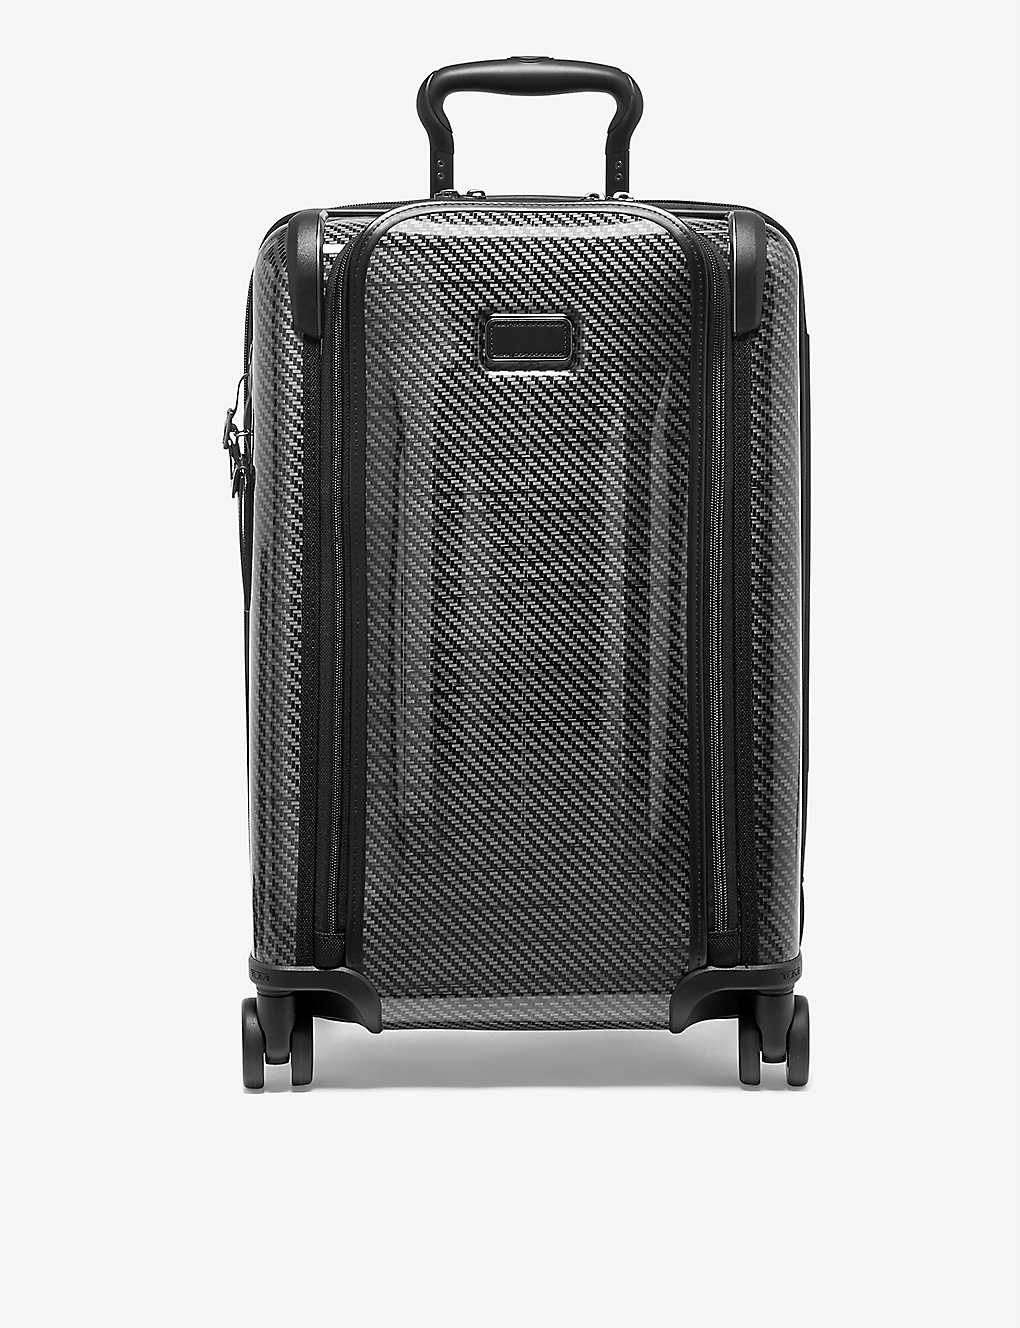 Tumi International Expandable Four-wheel Hard-shell Carry-on Suitcase 55cm In Black/graphite